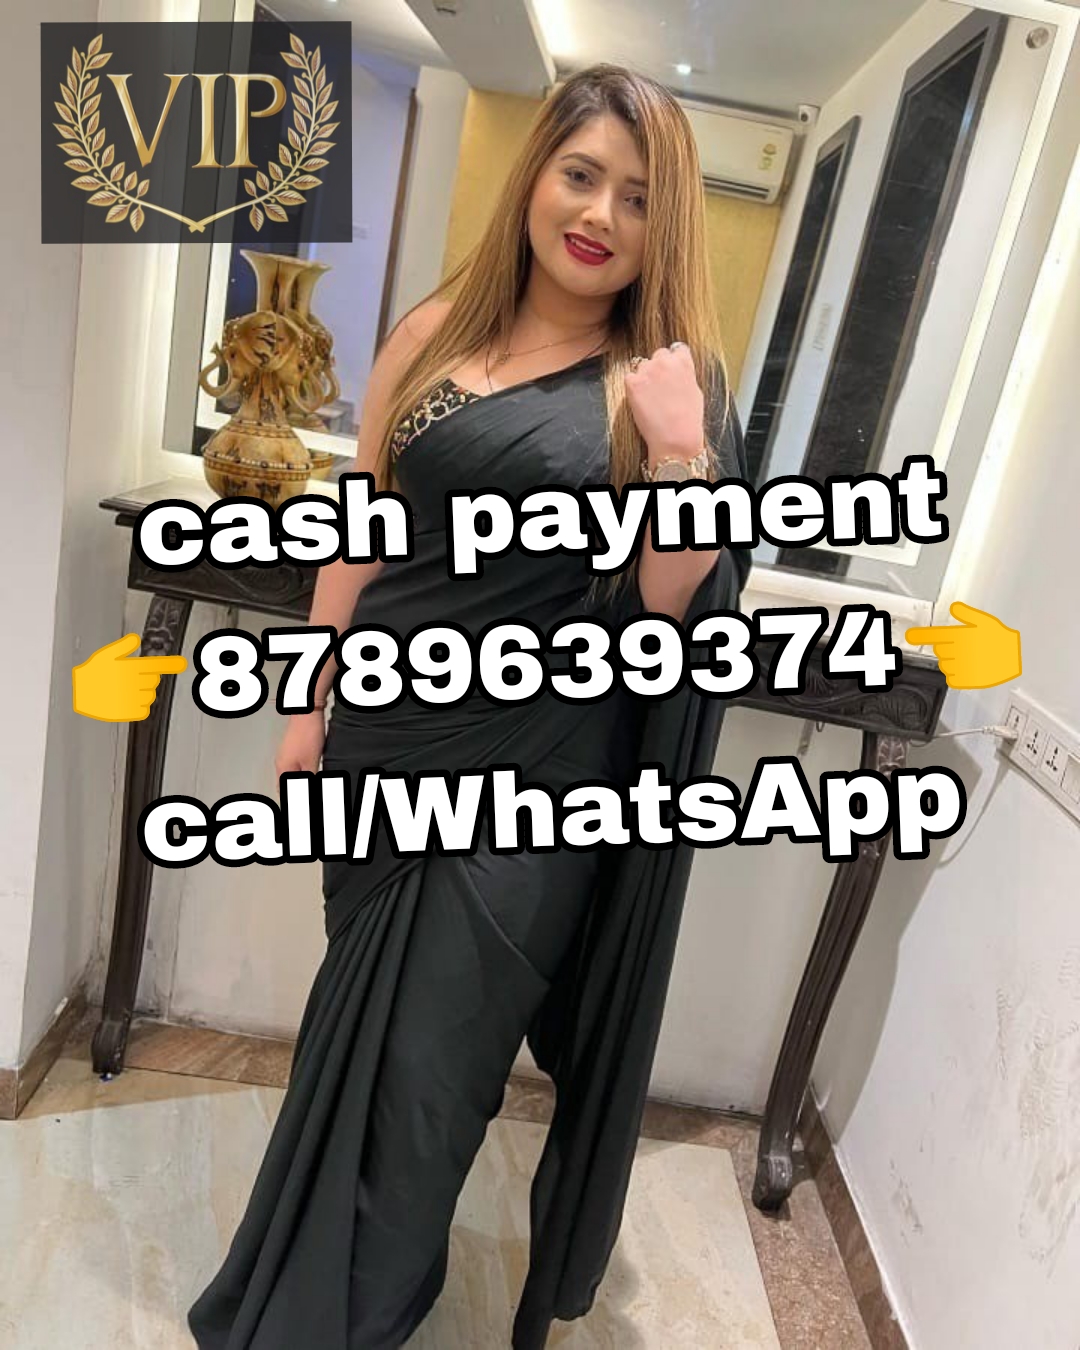 PANVEL IN VIP MODEL FULL TRUSTED GENUINE SERVICE AVAILABLE ANYTIME 